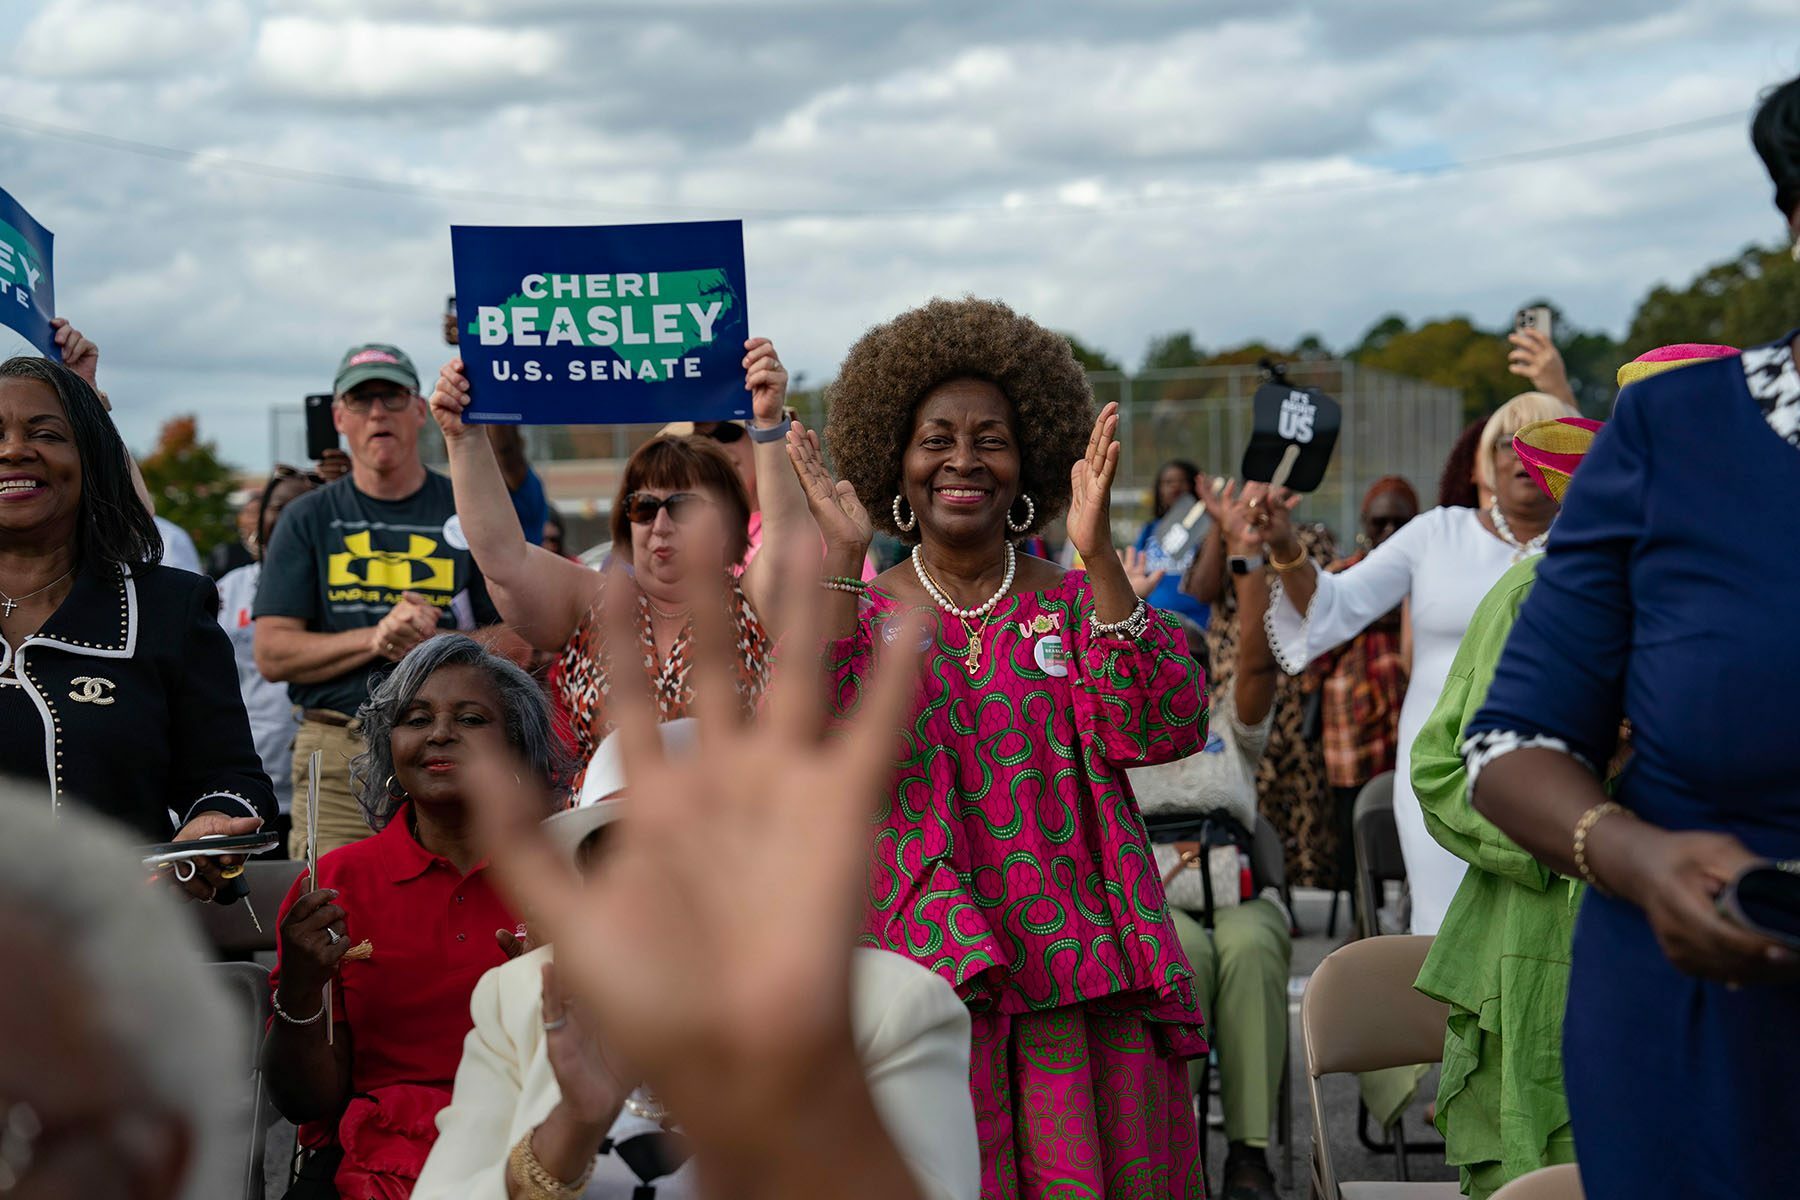 Cheri Beasley supporters smile, clap and cheer as she speaks at an event.